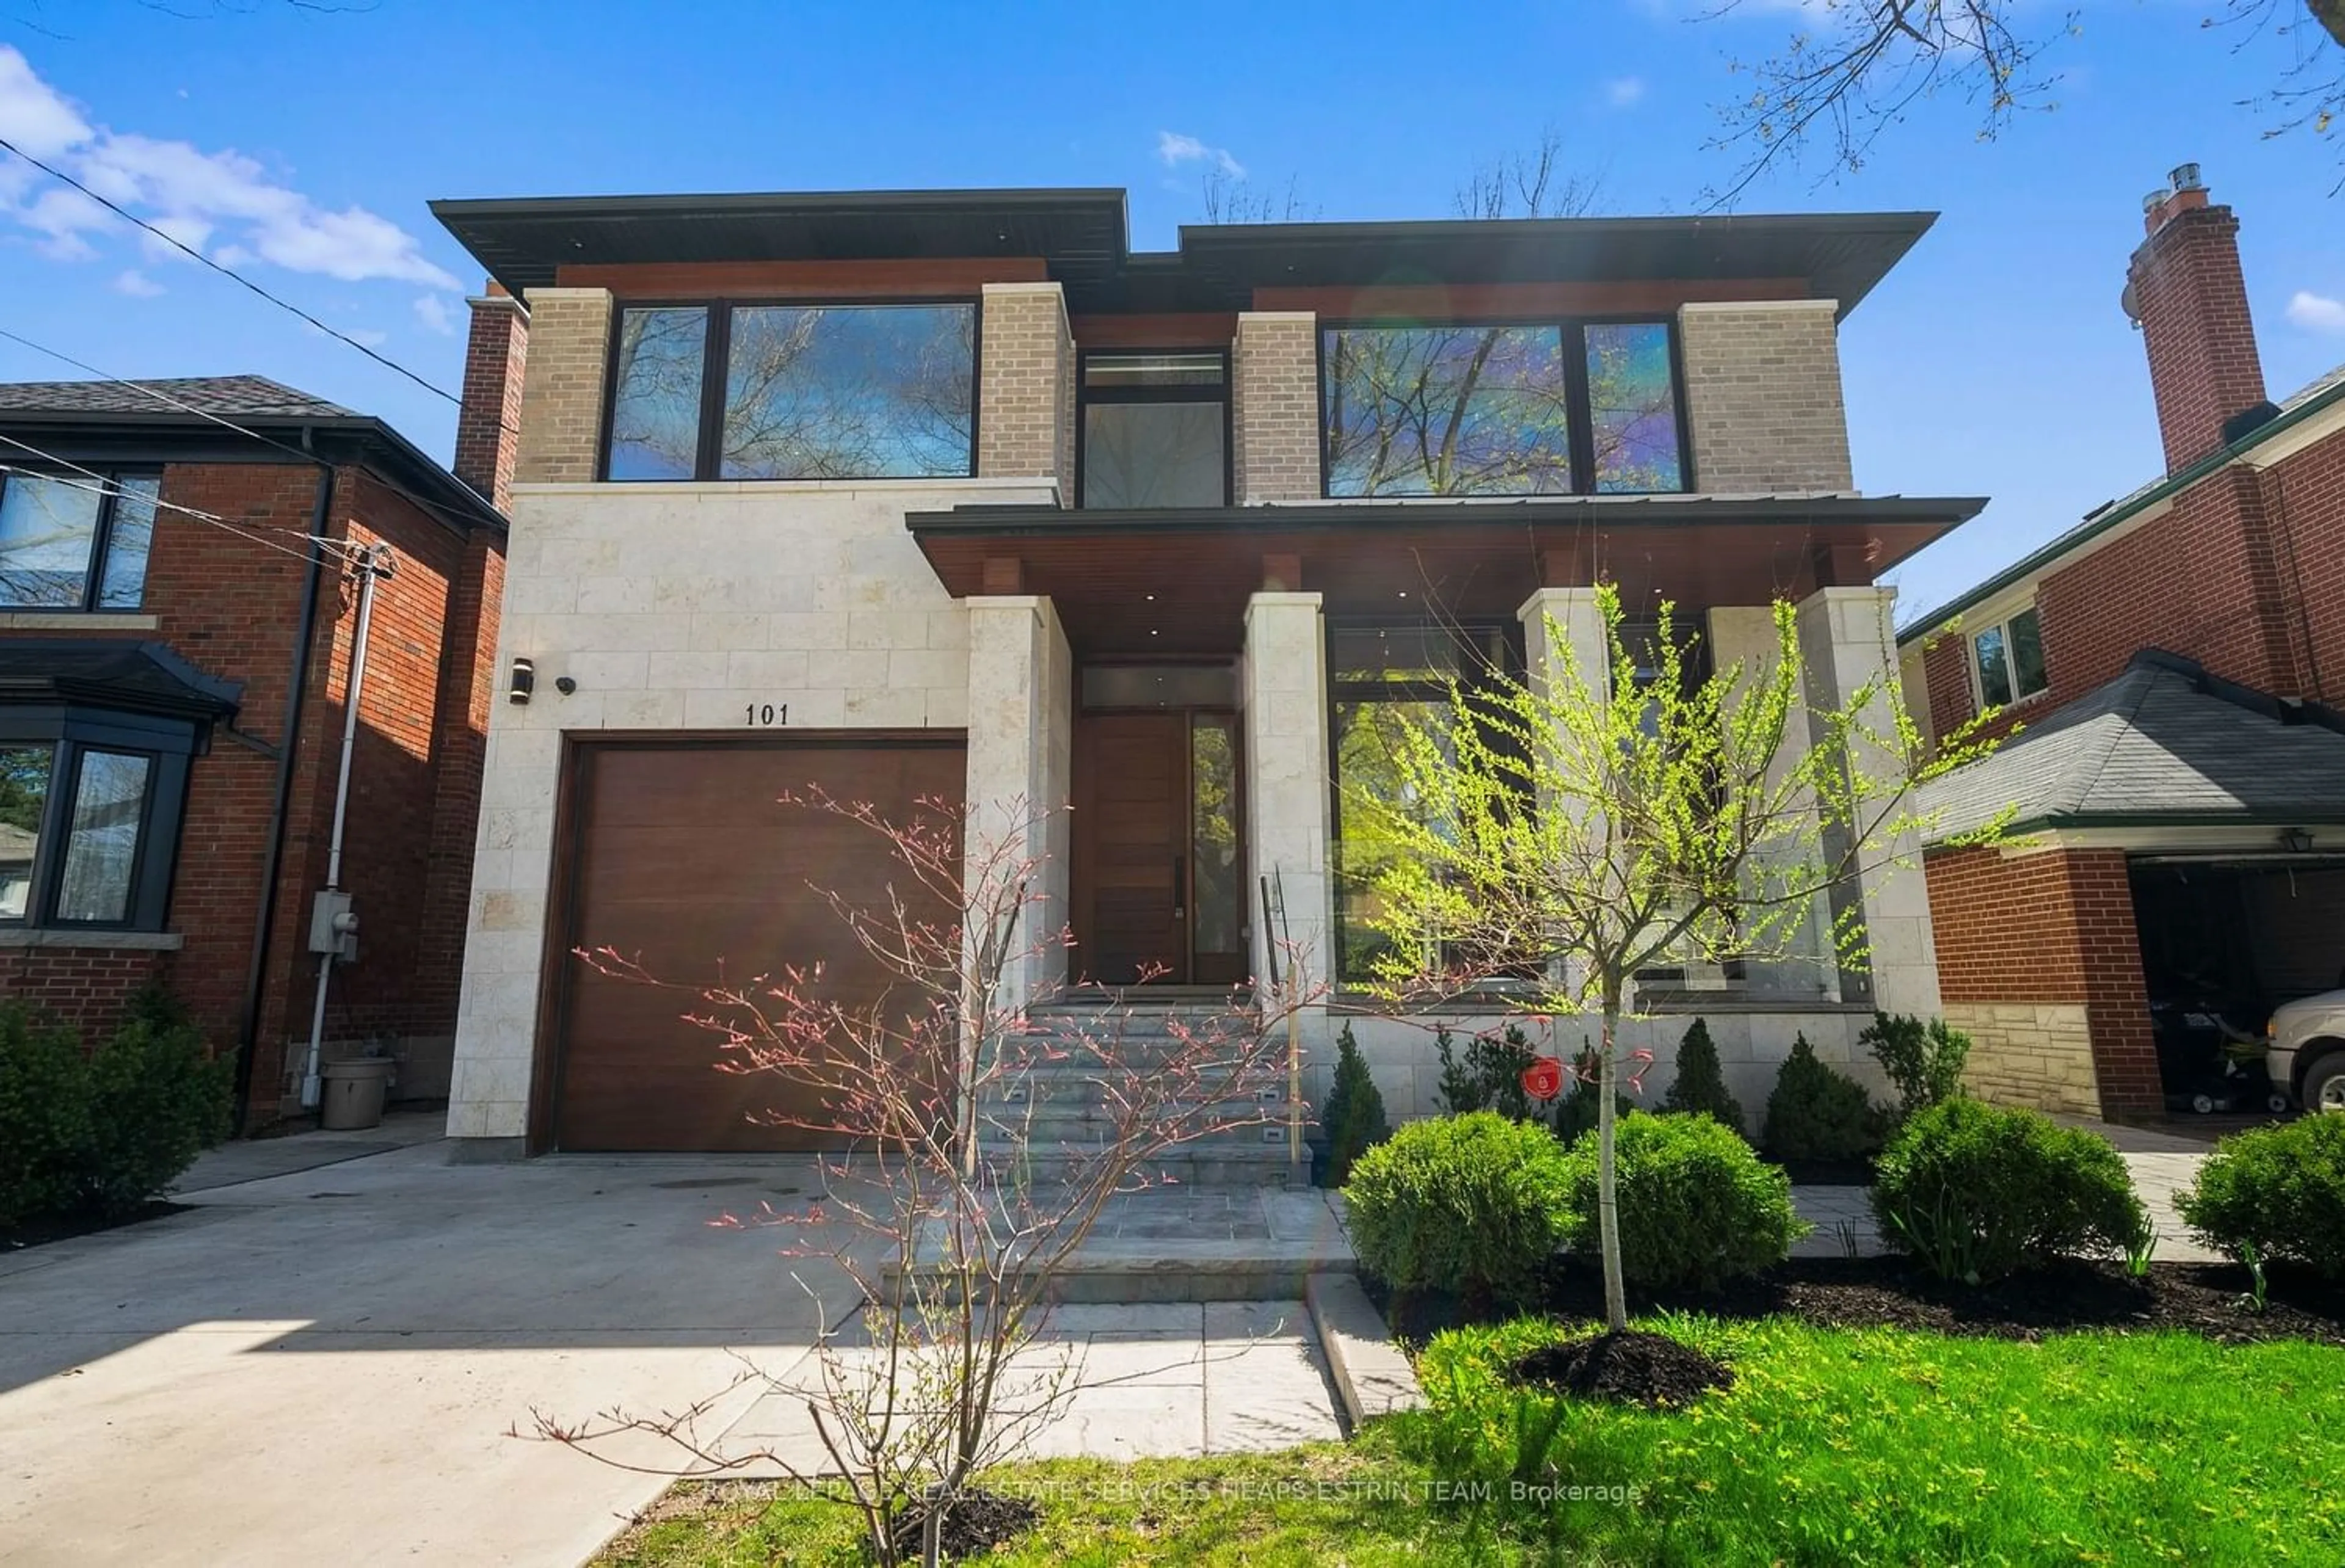 Home with brick exterior material for 101 Rykert Cres, Toronto Ontario M4G 2T4